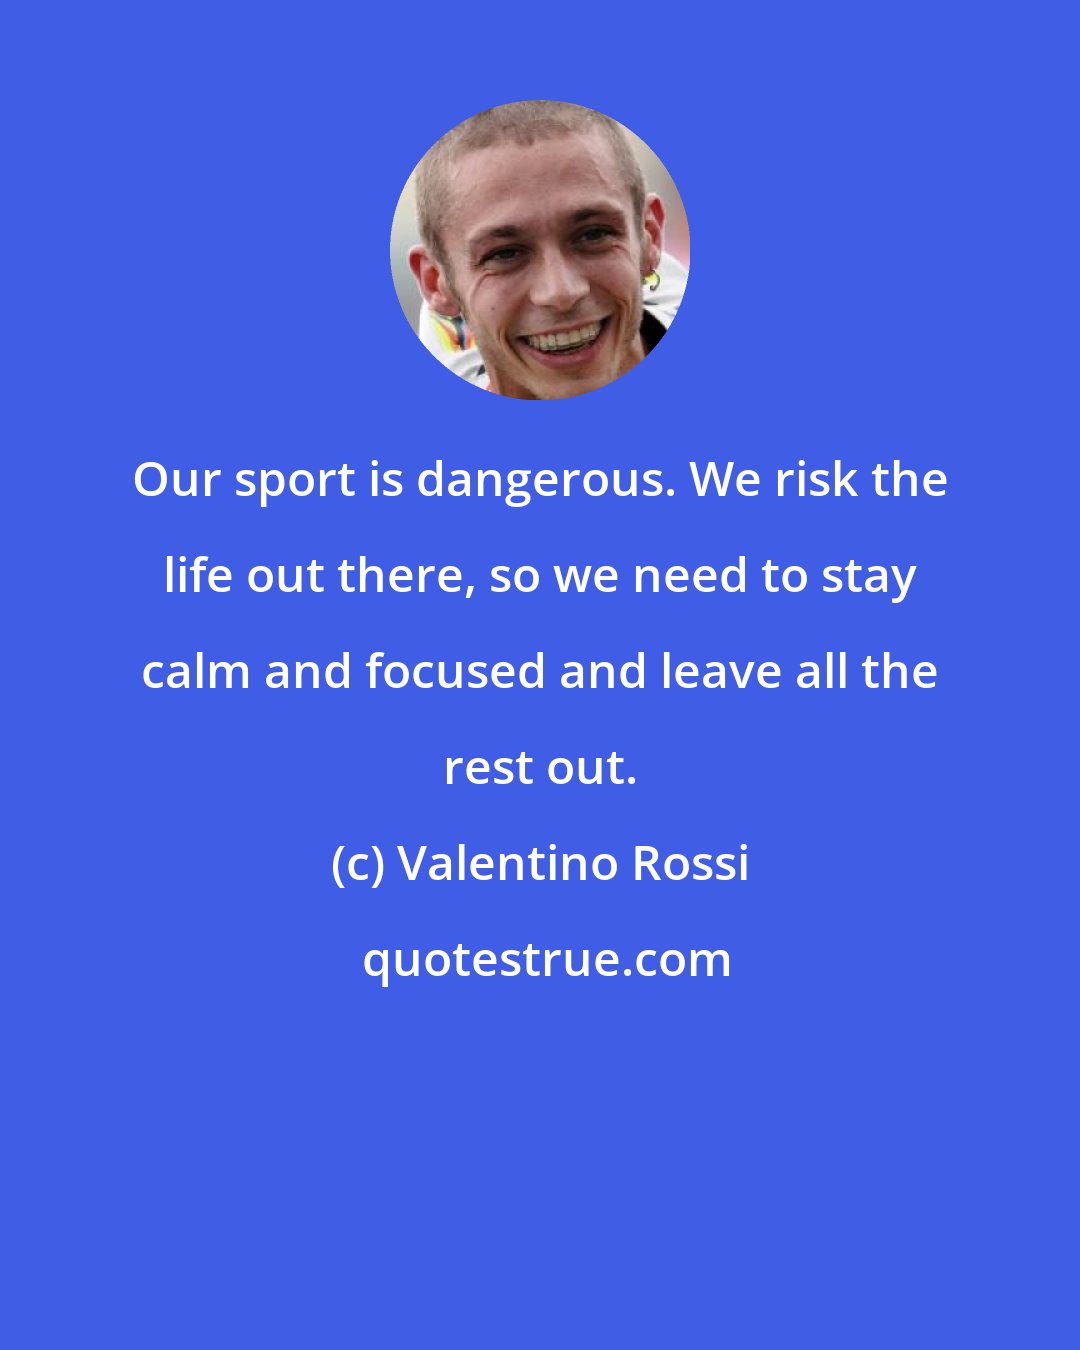 Valentino Rossi: Our sport is dangerous. We risk the life out there, so we need to stay calm and focused and leave all the rest out.